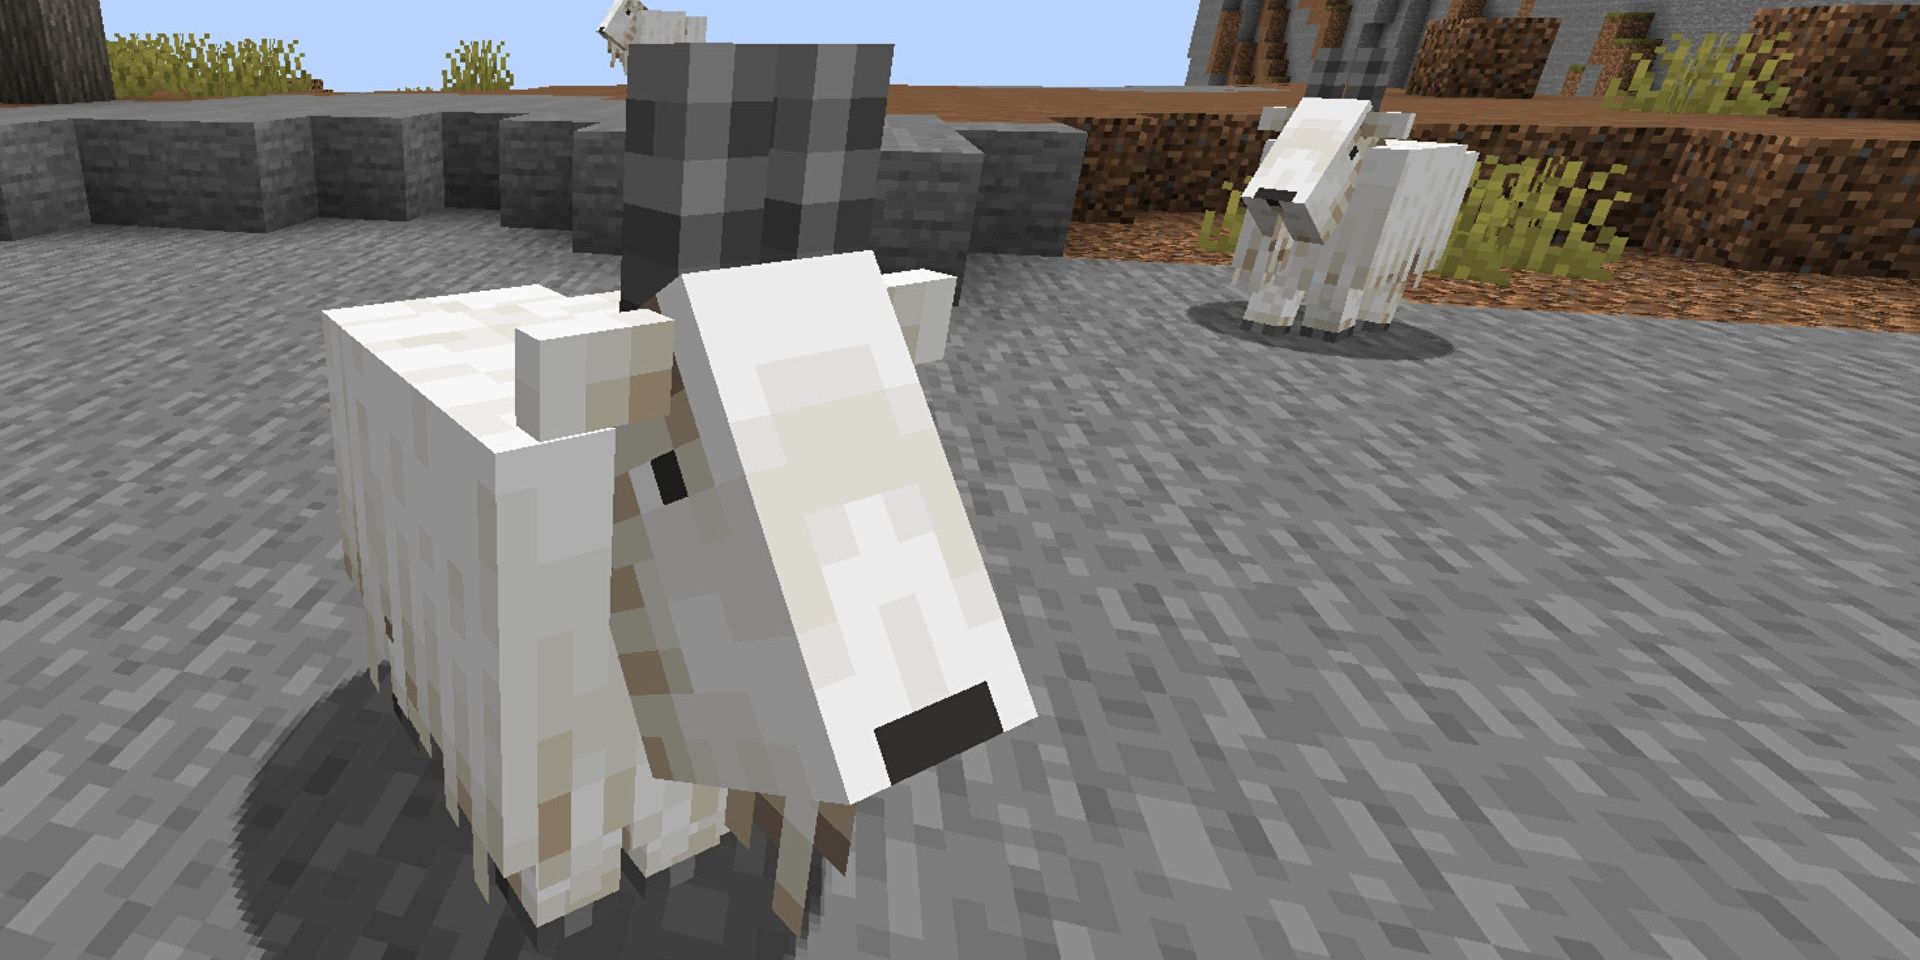 Goats on a mountain in Minecraft